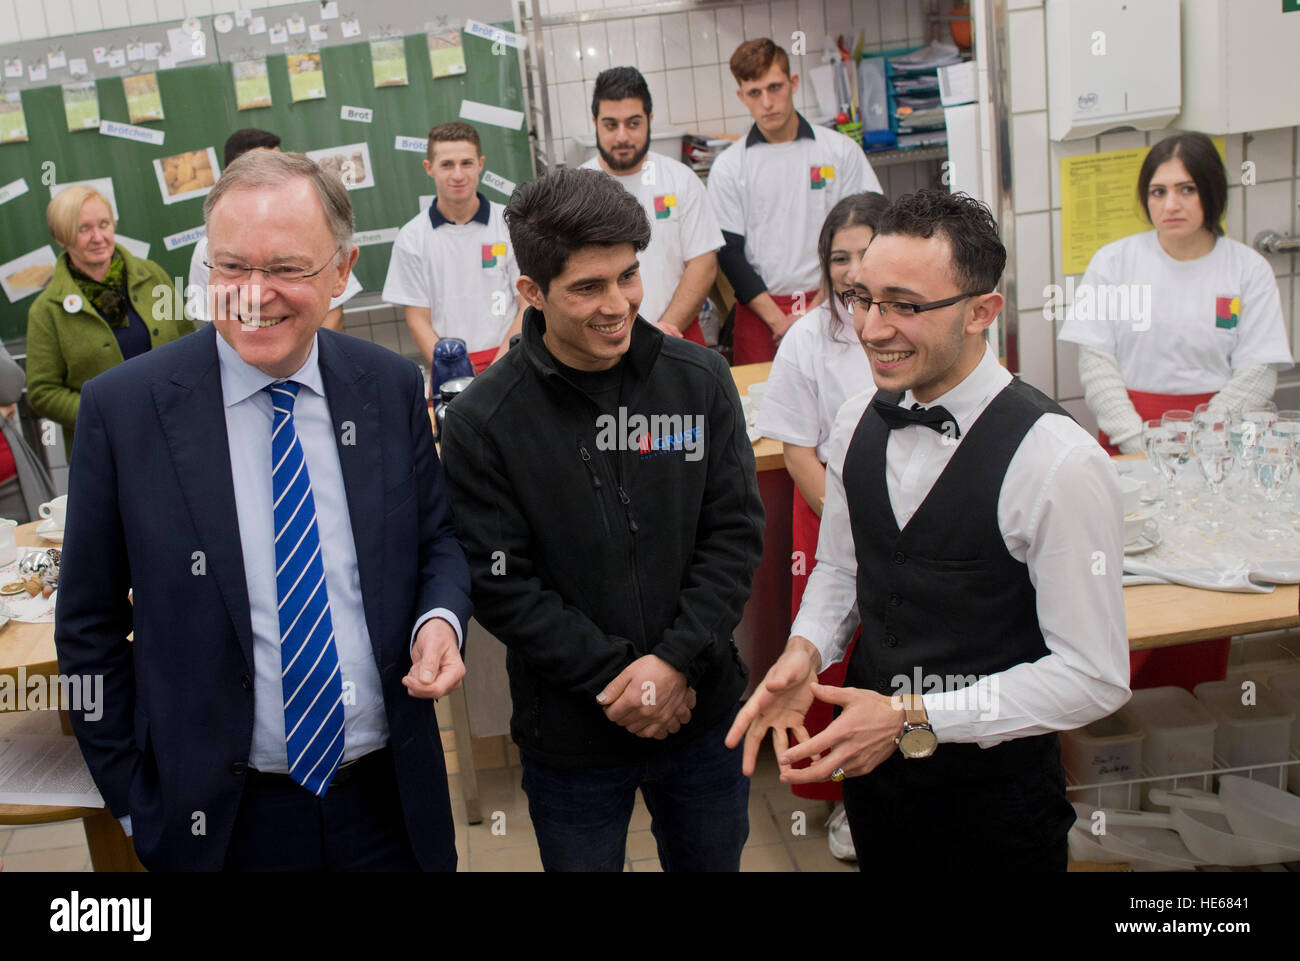 Hameln, Germany. 19th Dec, 2016. Premier of Lower Saxony Stephan Weil (l, SPD) speaking with refugees Mirwais Hashemi (c) from Afghanistan and Mohamad Hamada (r) from Syria at the Elisabeth-Selbert-Schule vocational college in Hameln, Germany, 19 December 2016. Weil was informed about the training and integration of refugees in Hameln. Photo: Julian Stratenschulte/dpa/Alamy Live News Stock Photo